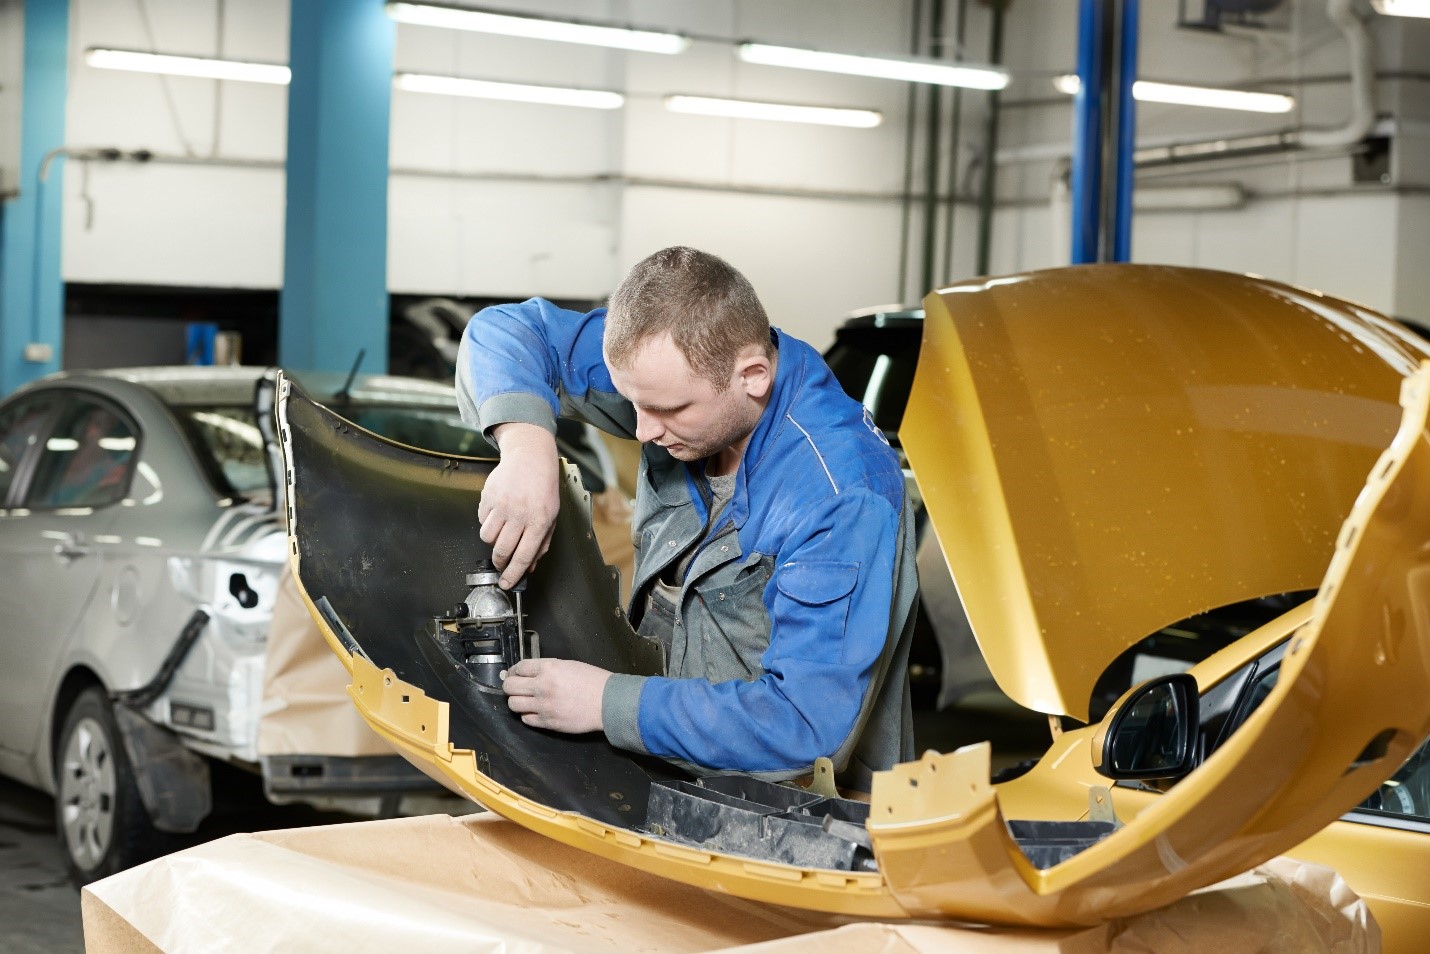 A repair technician performing collision repair on parts of a vehicle.